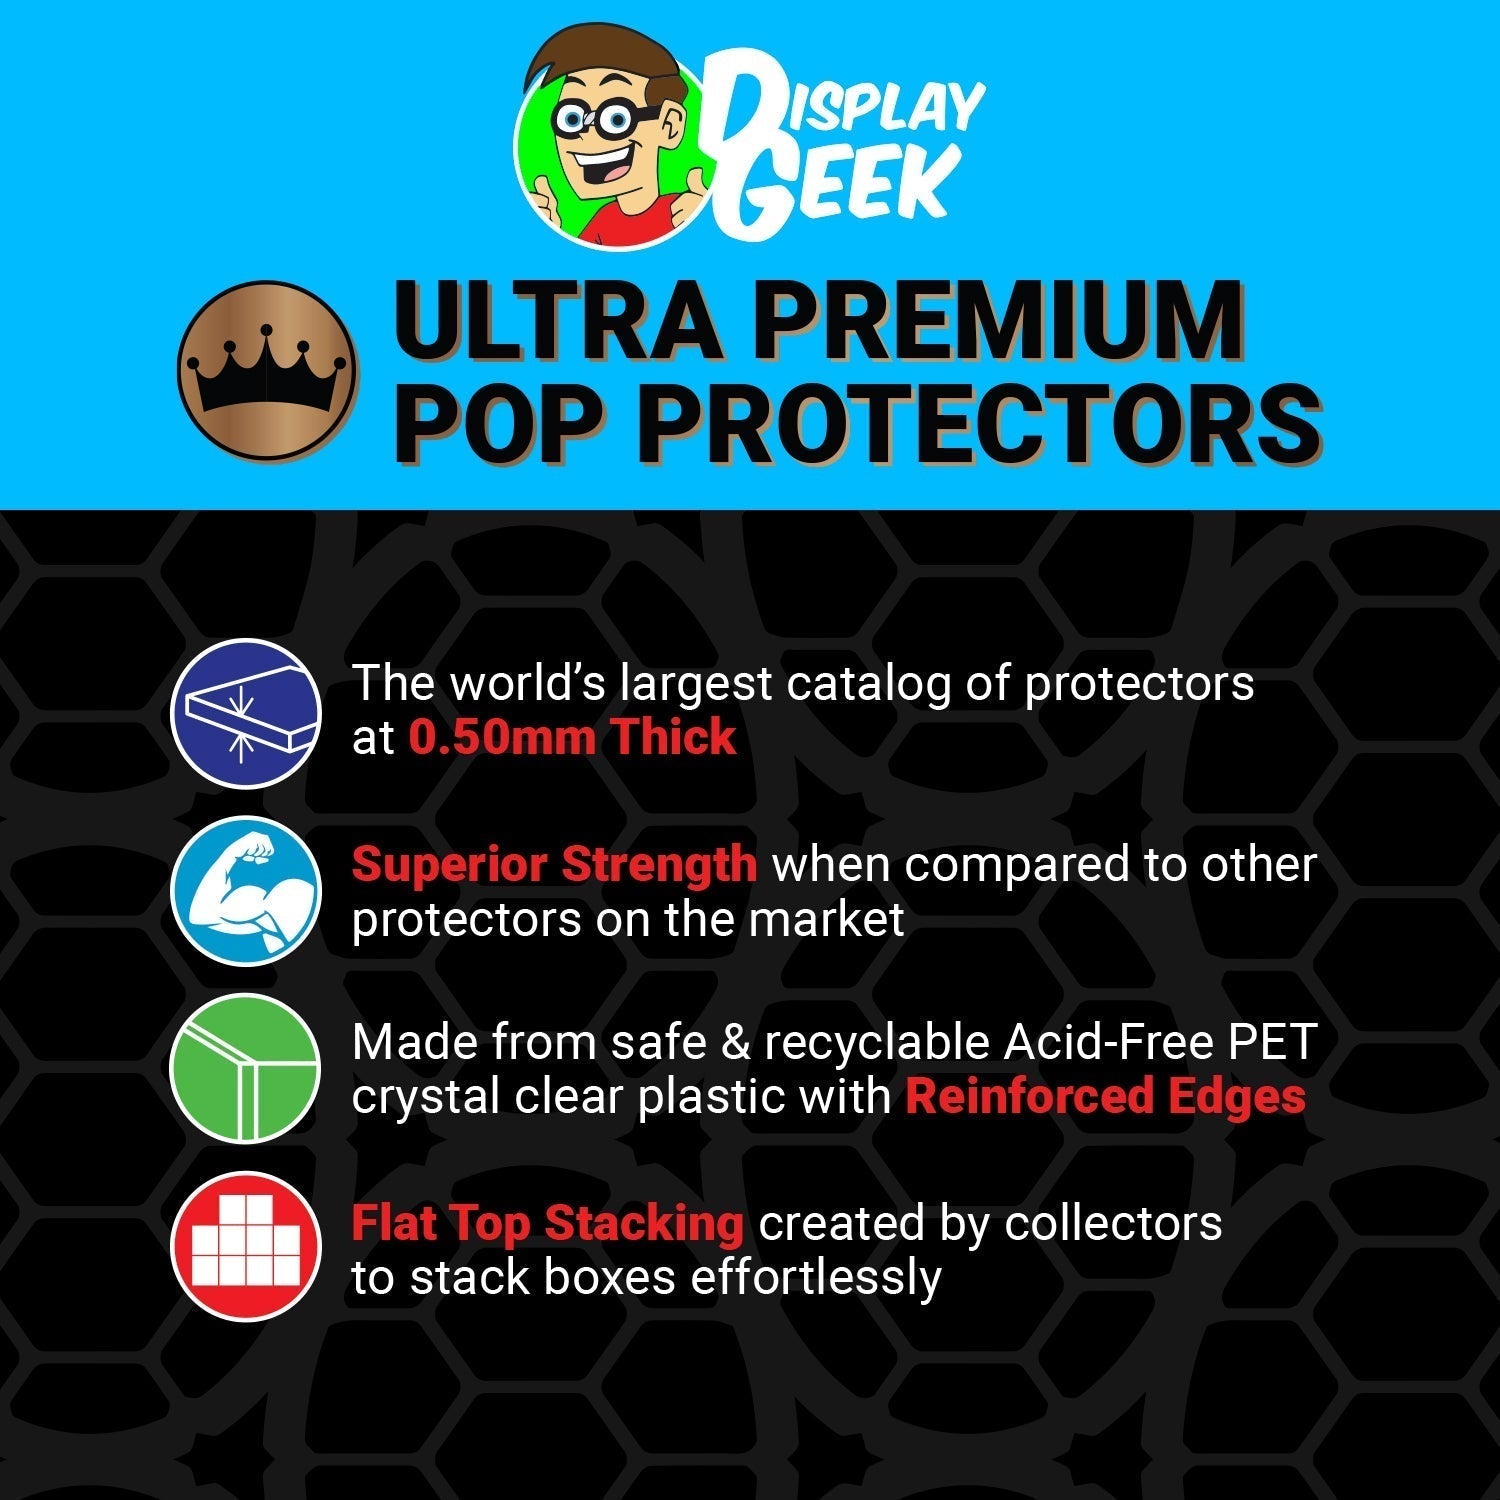 Pop Protector for 4 Pack DC Holiday Funko Pop - PPG Pop Protector Guide Search Created by Display Geek